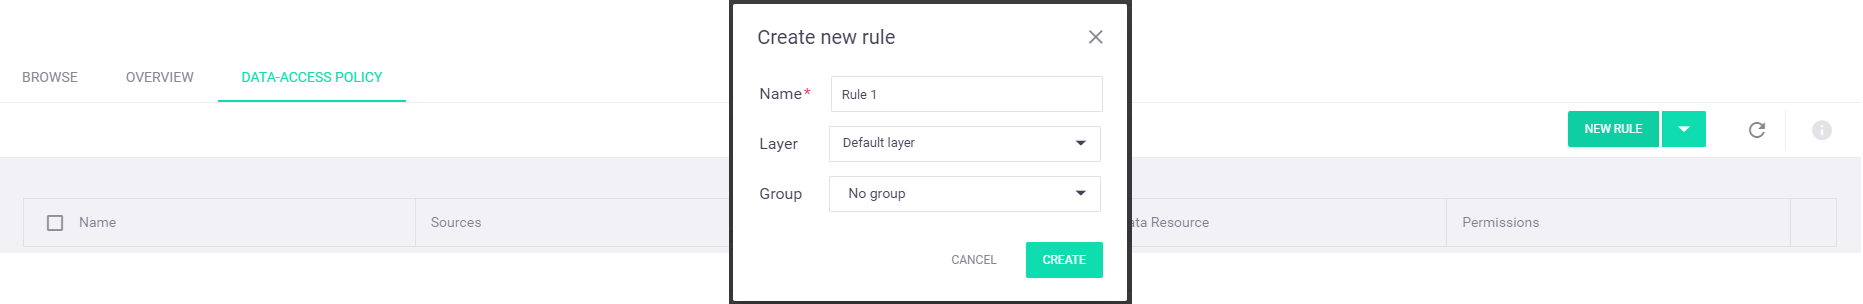 Create new data-access policy rule